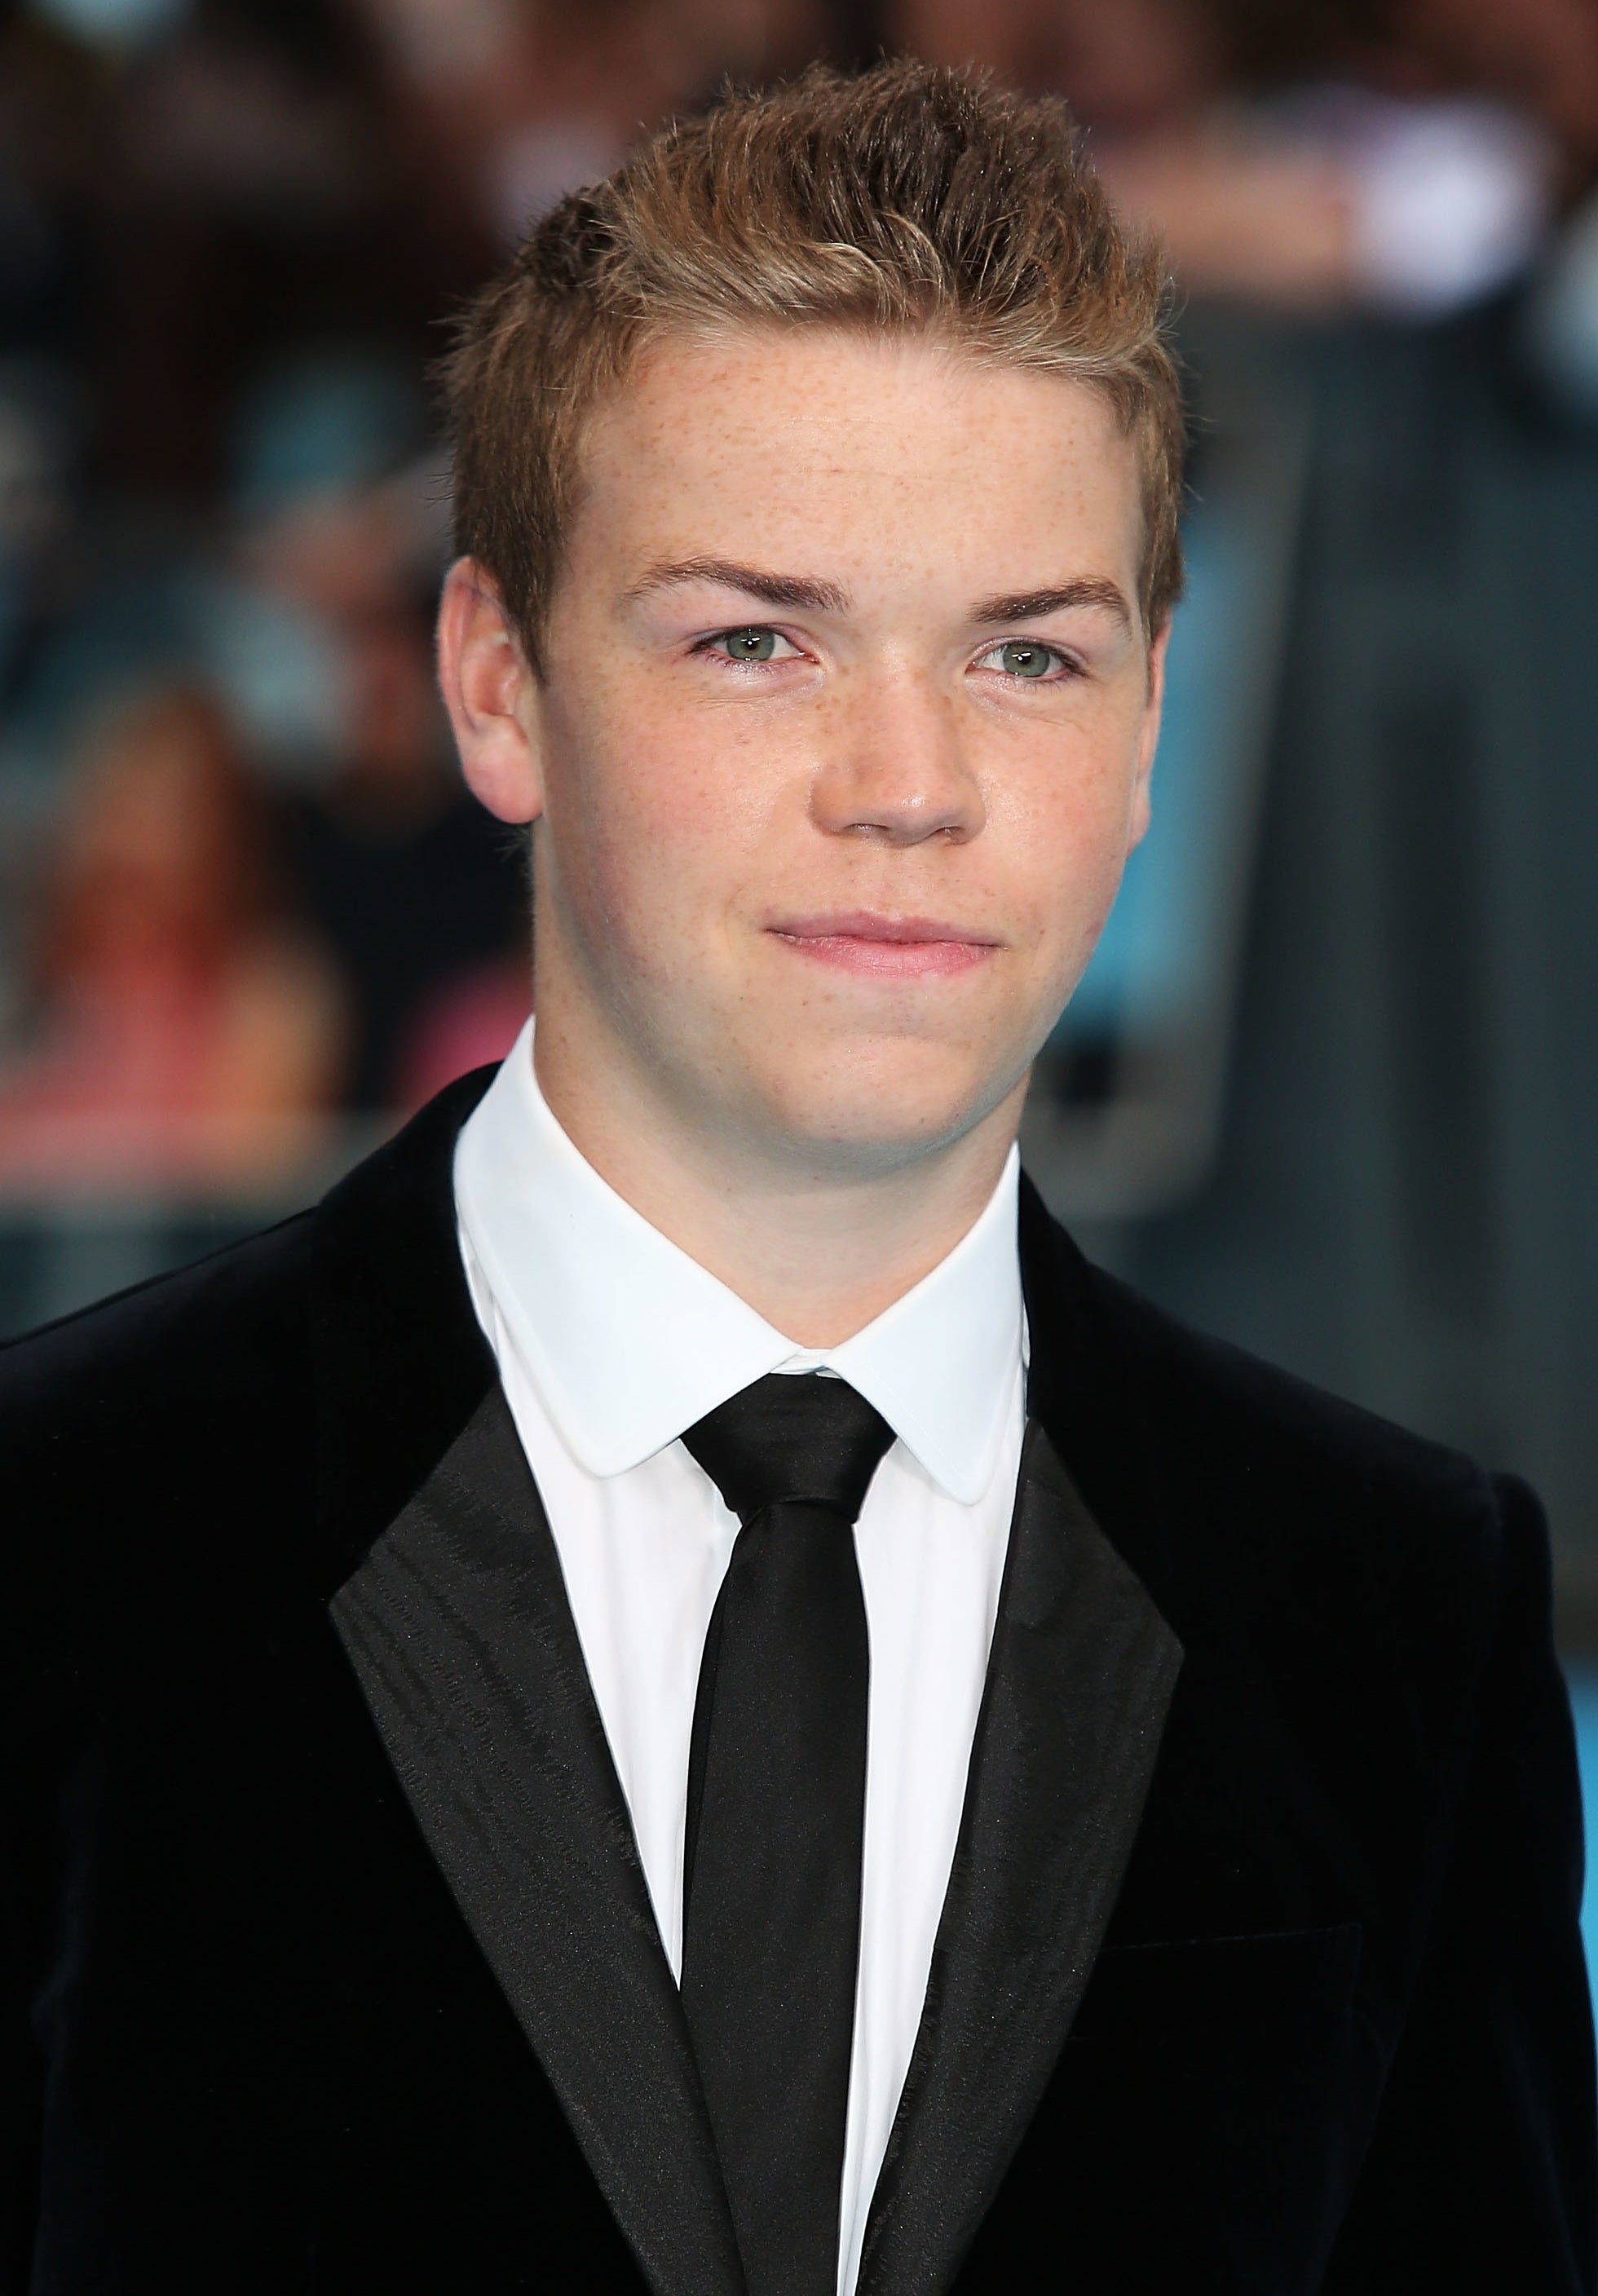 Will Poulter in a suit and tie and short hair